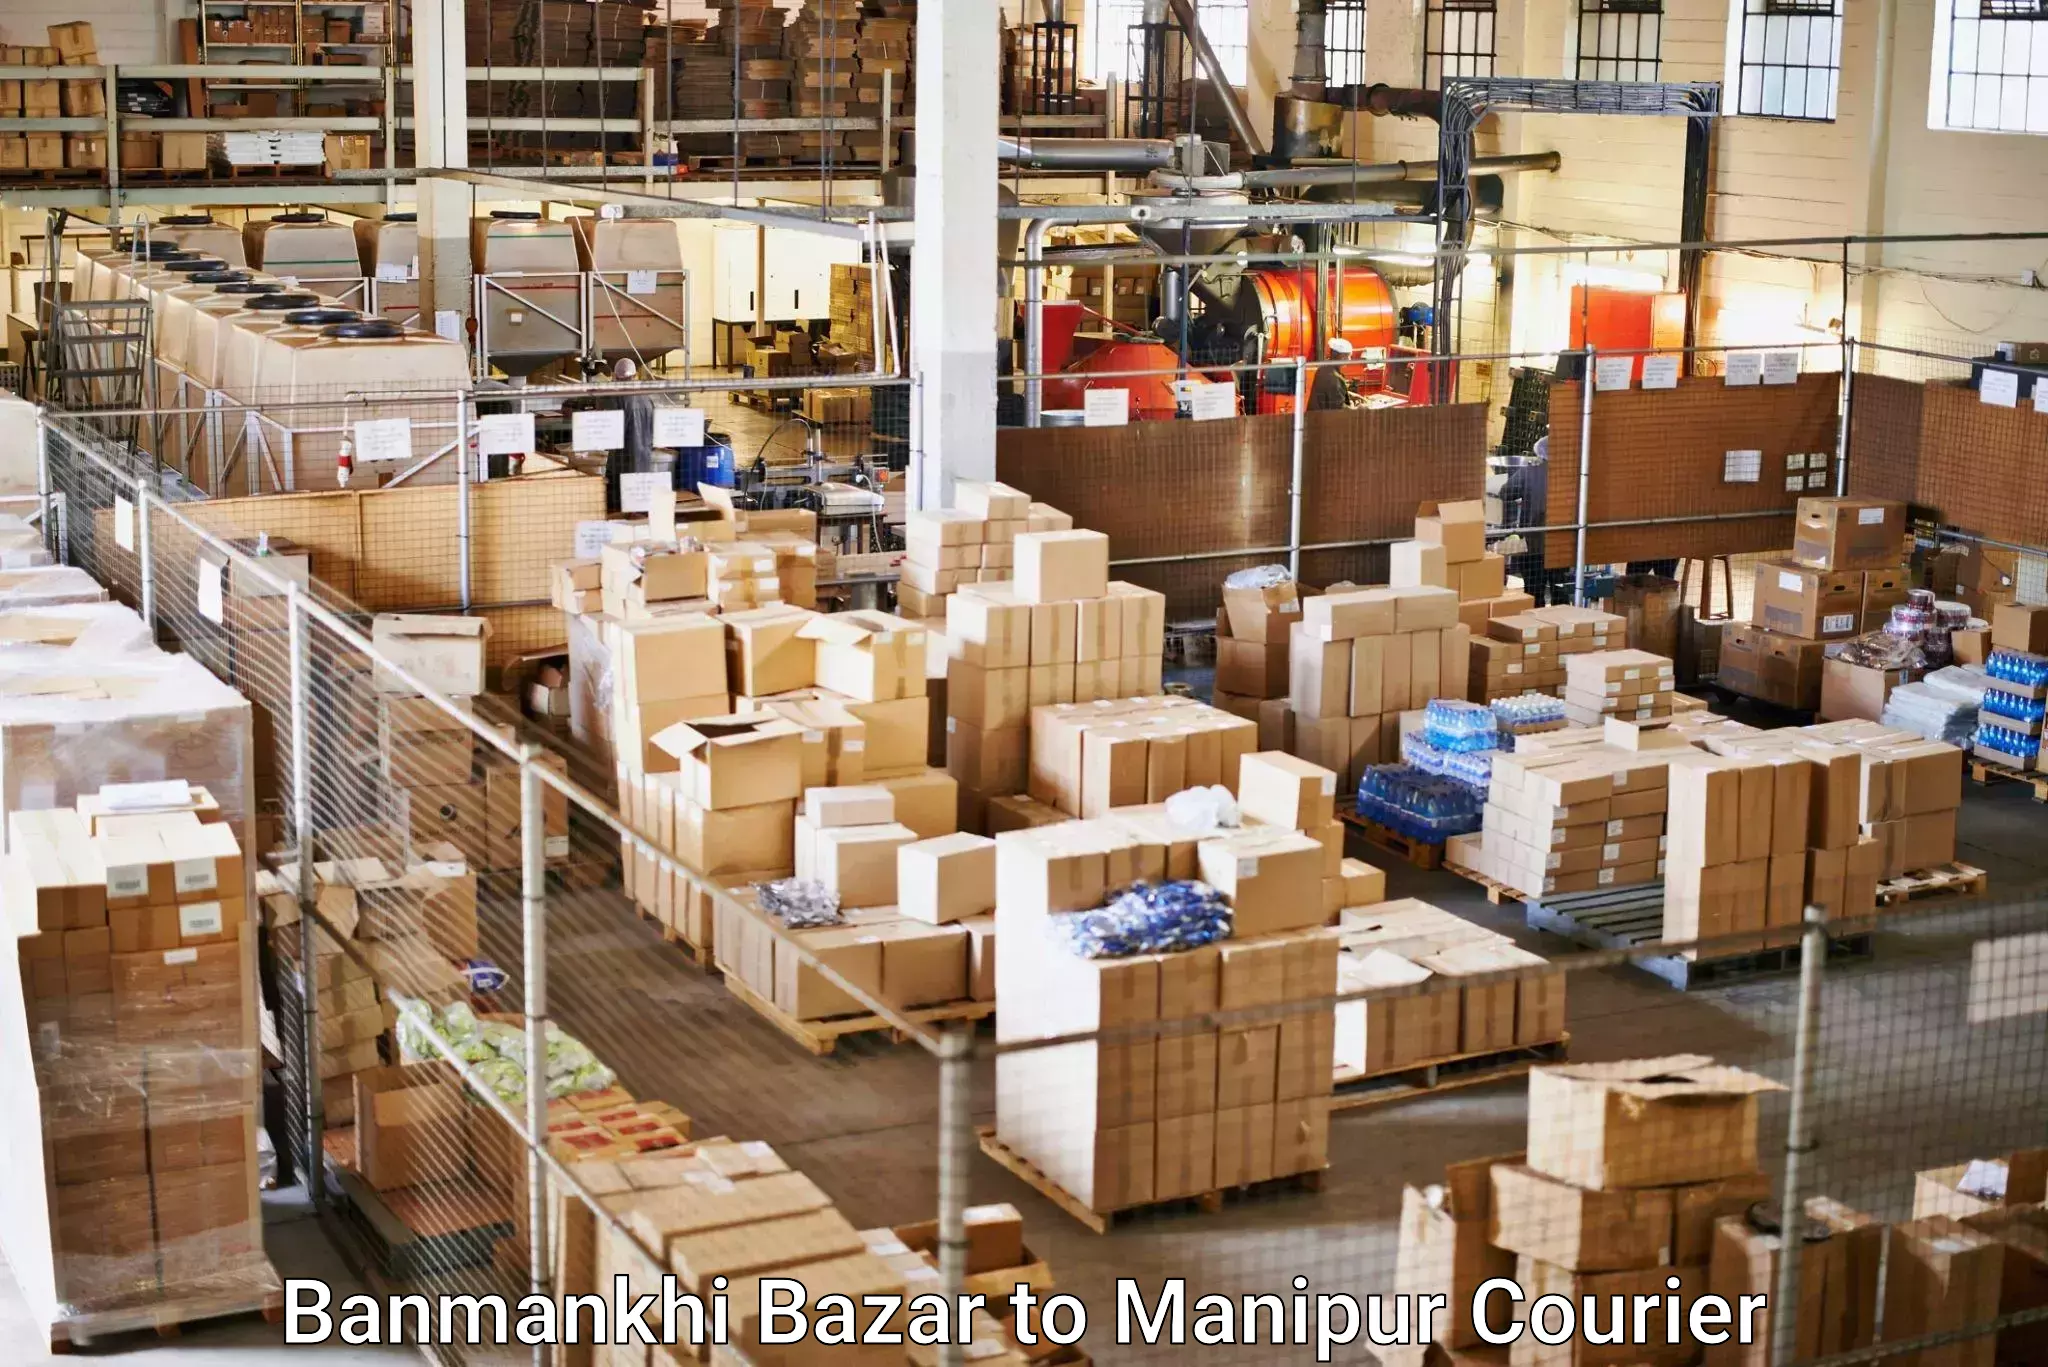 Comprehensive shipping network Banmankhi Bazar to Manipur